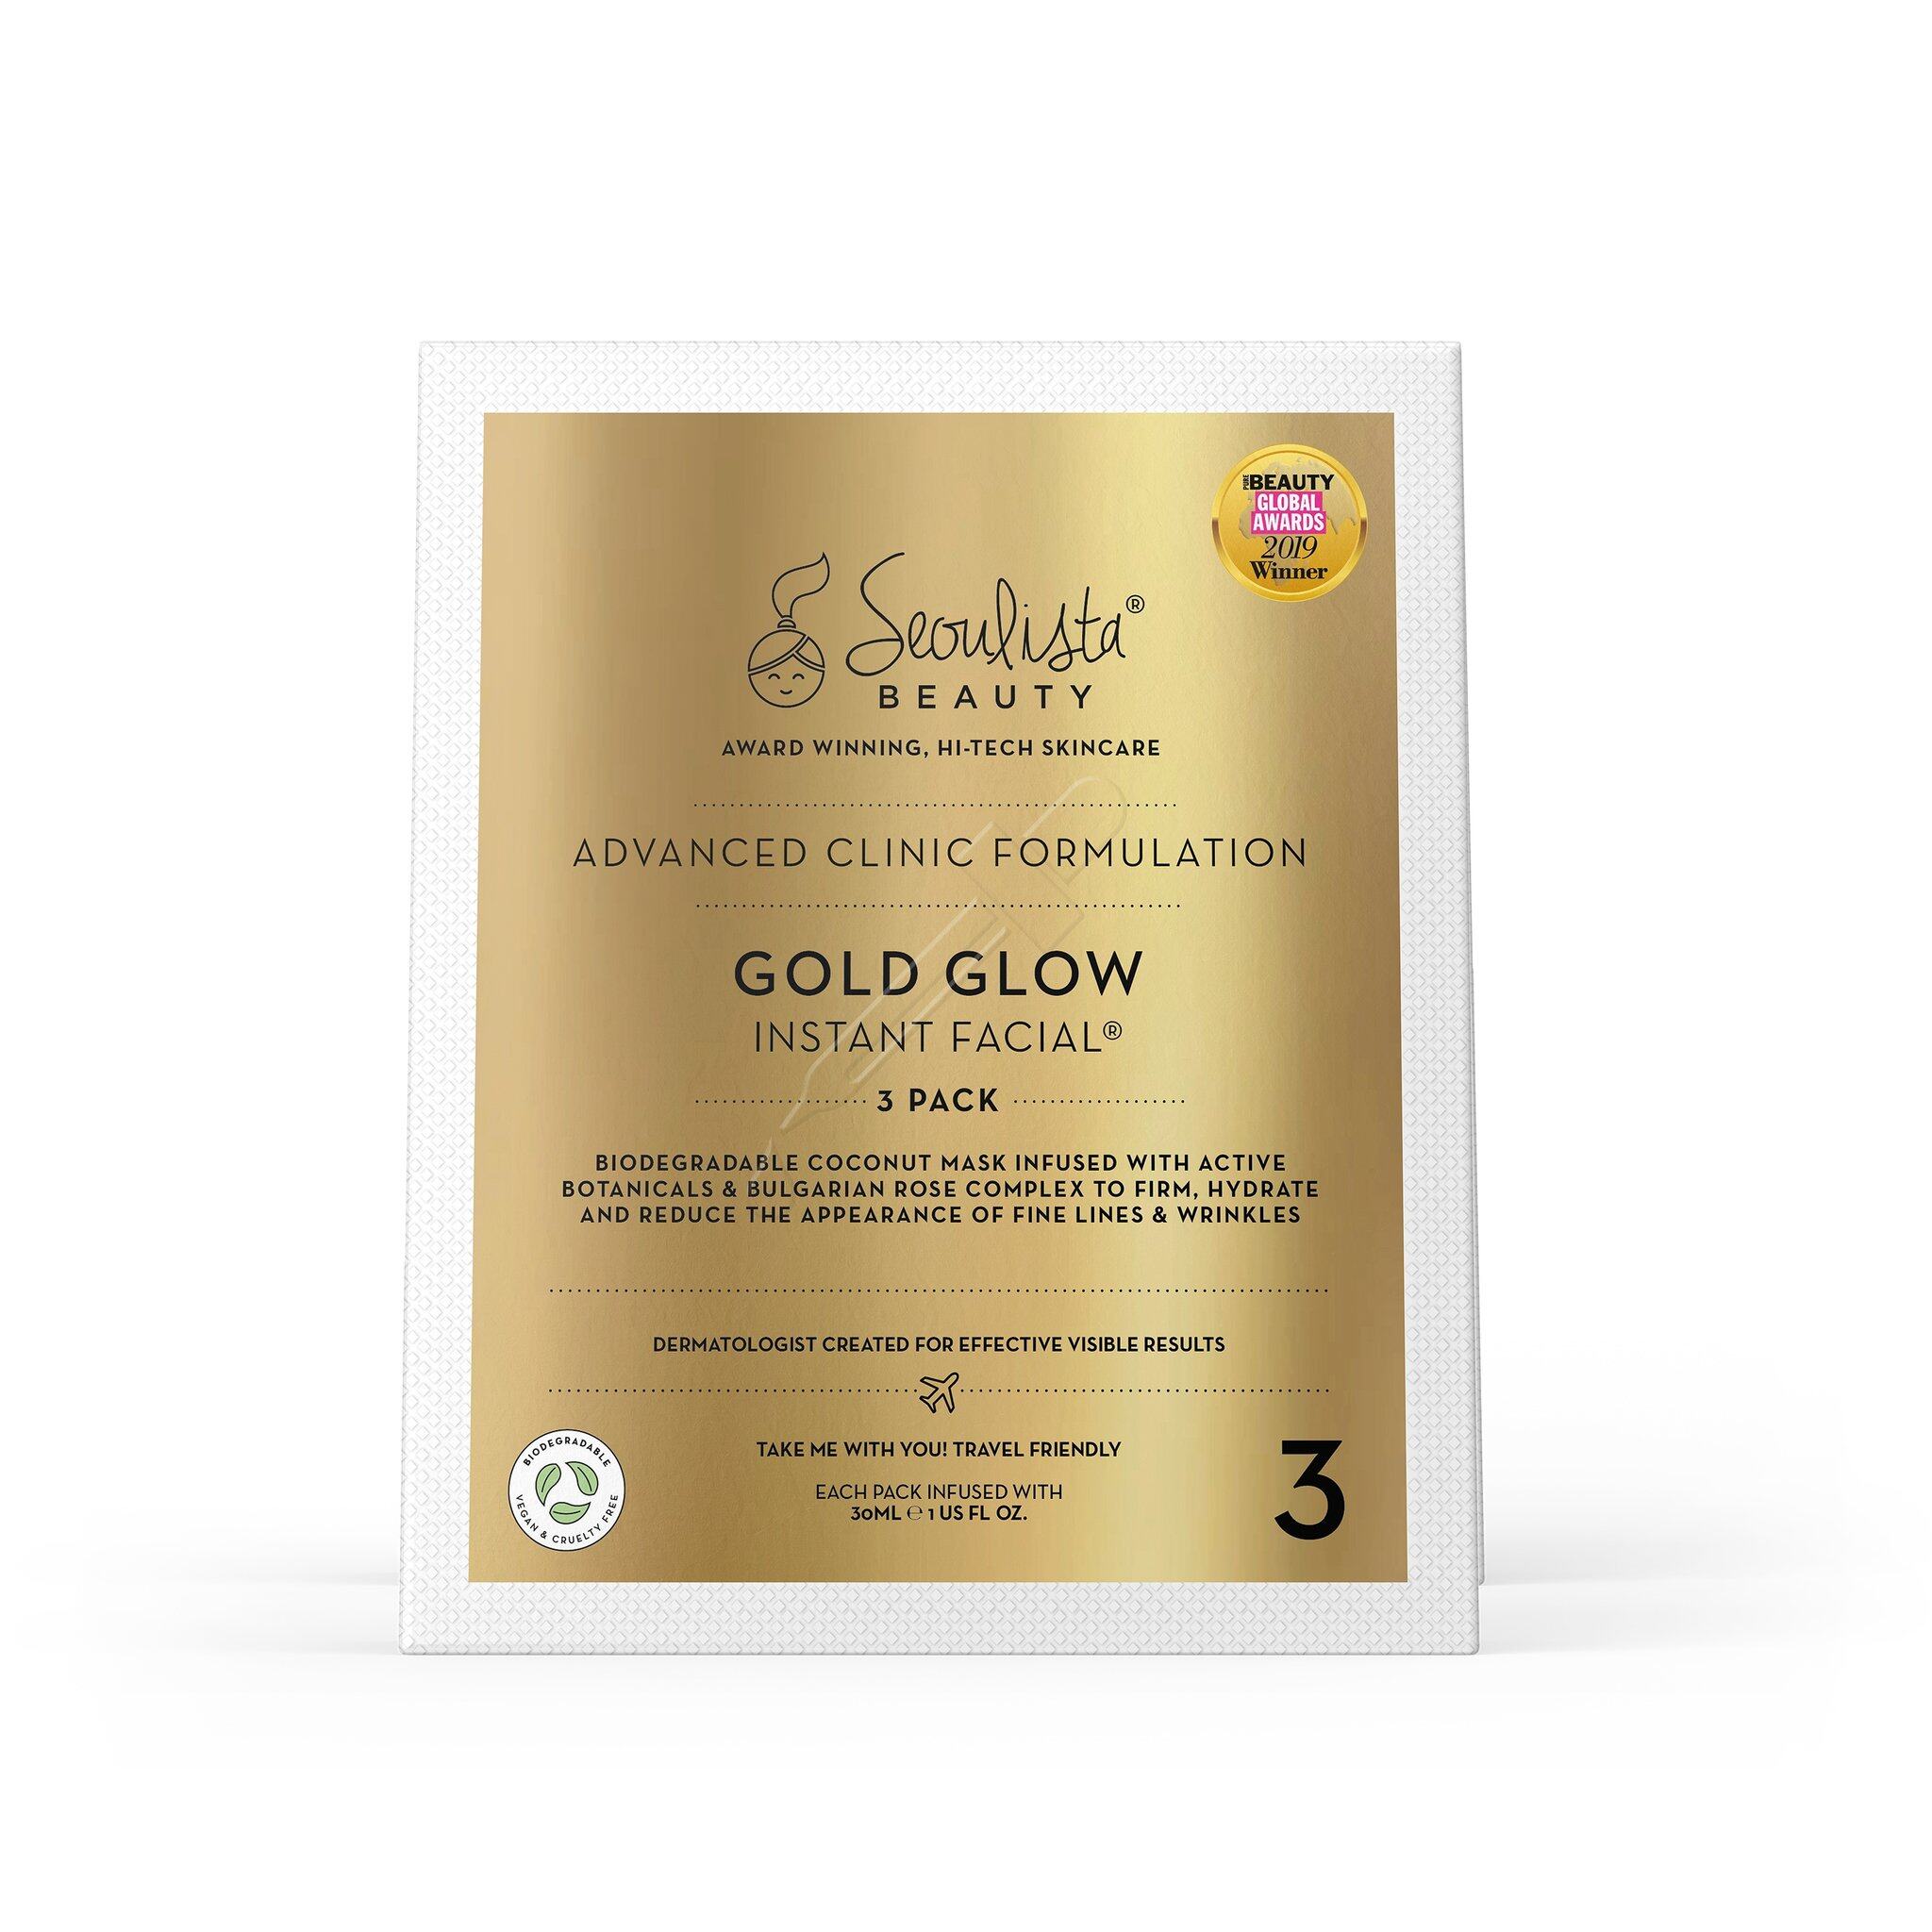 Seoulista Beauty Gold Glow Instant Facial Multi Pack (3EA)